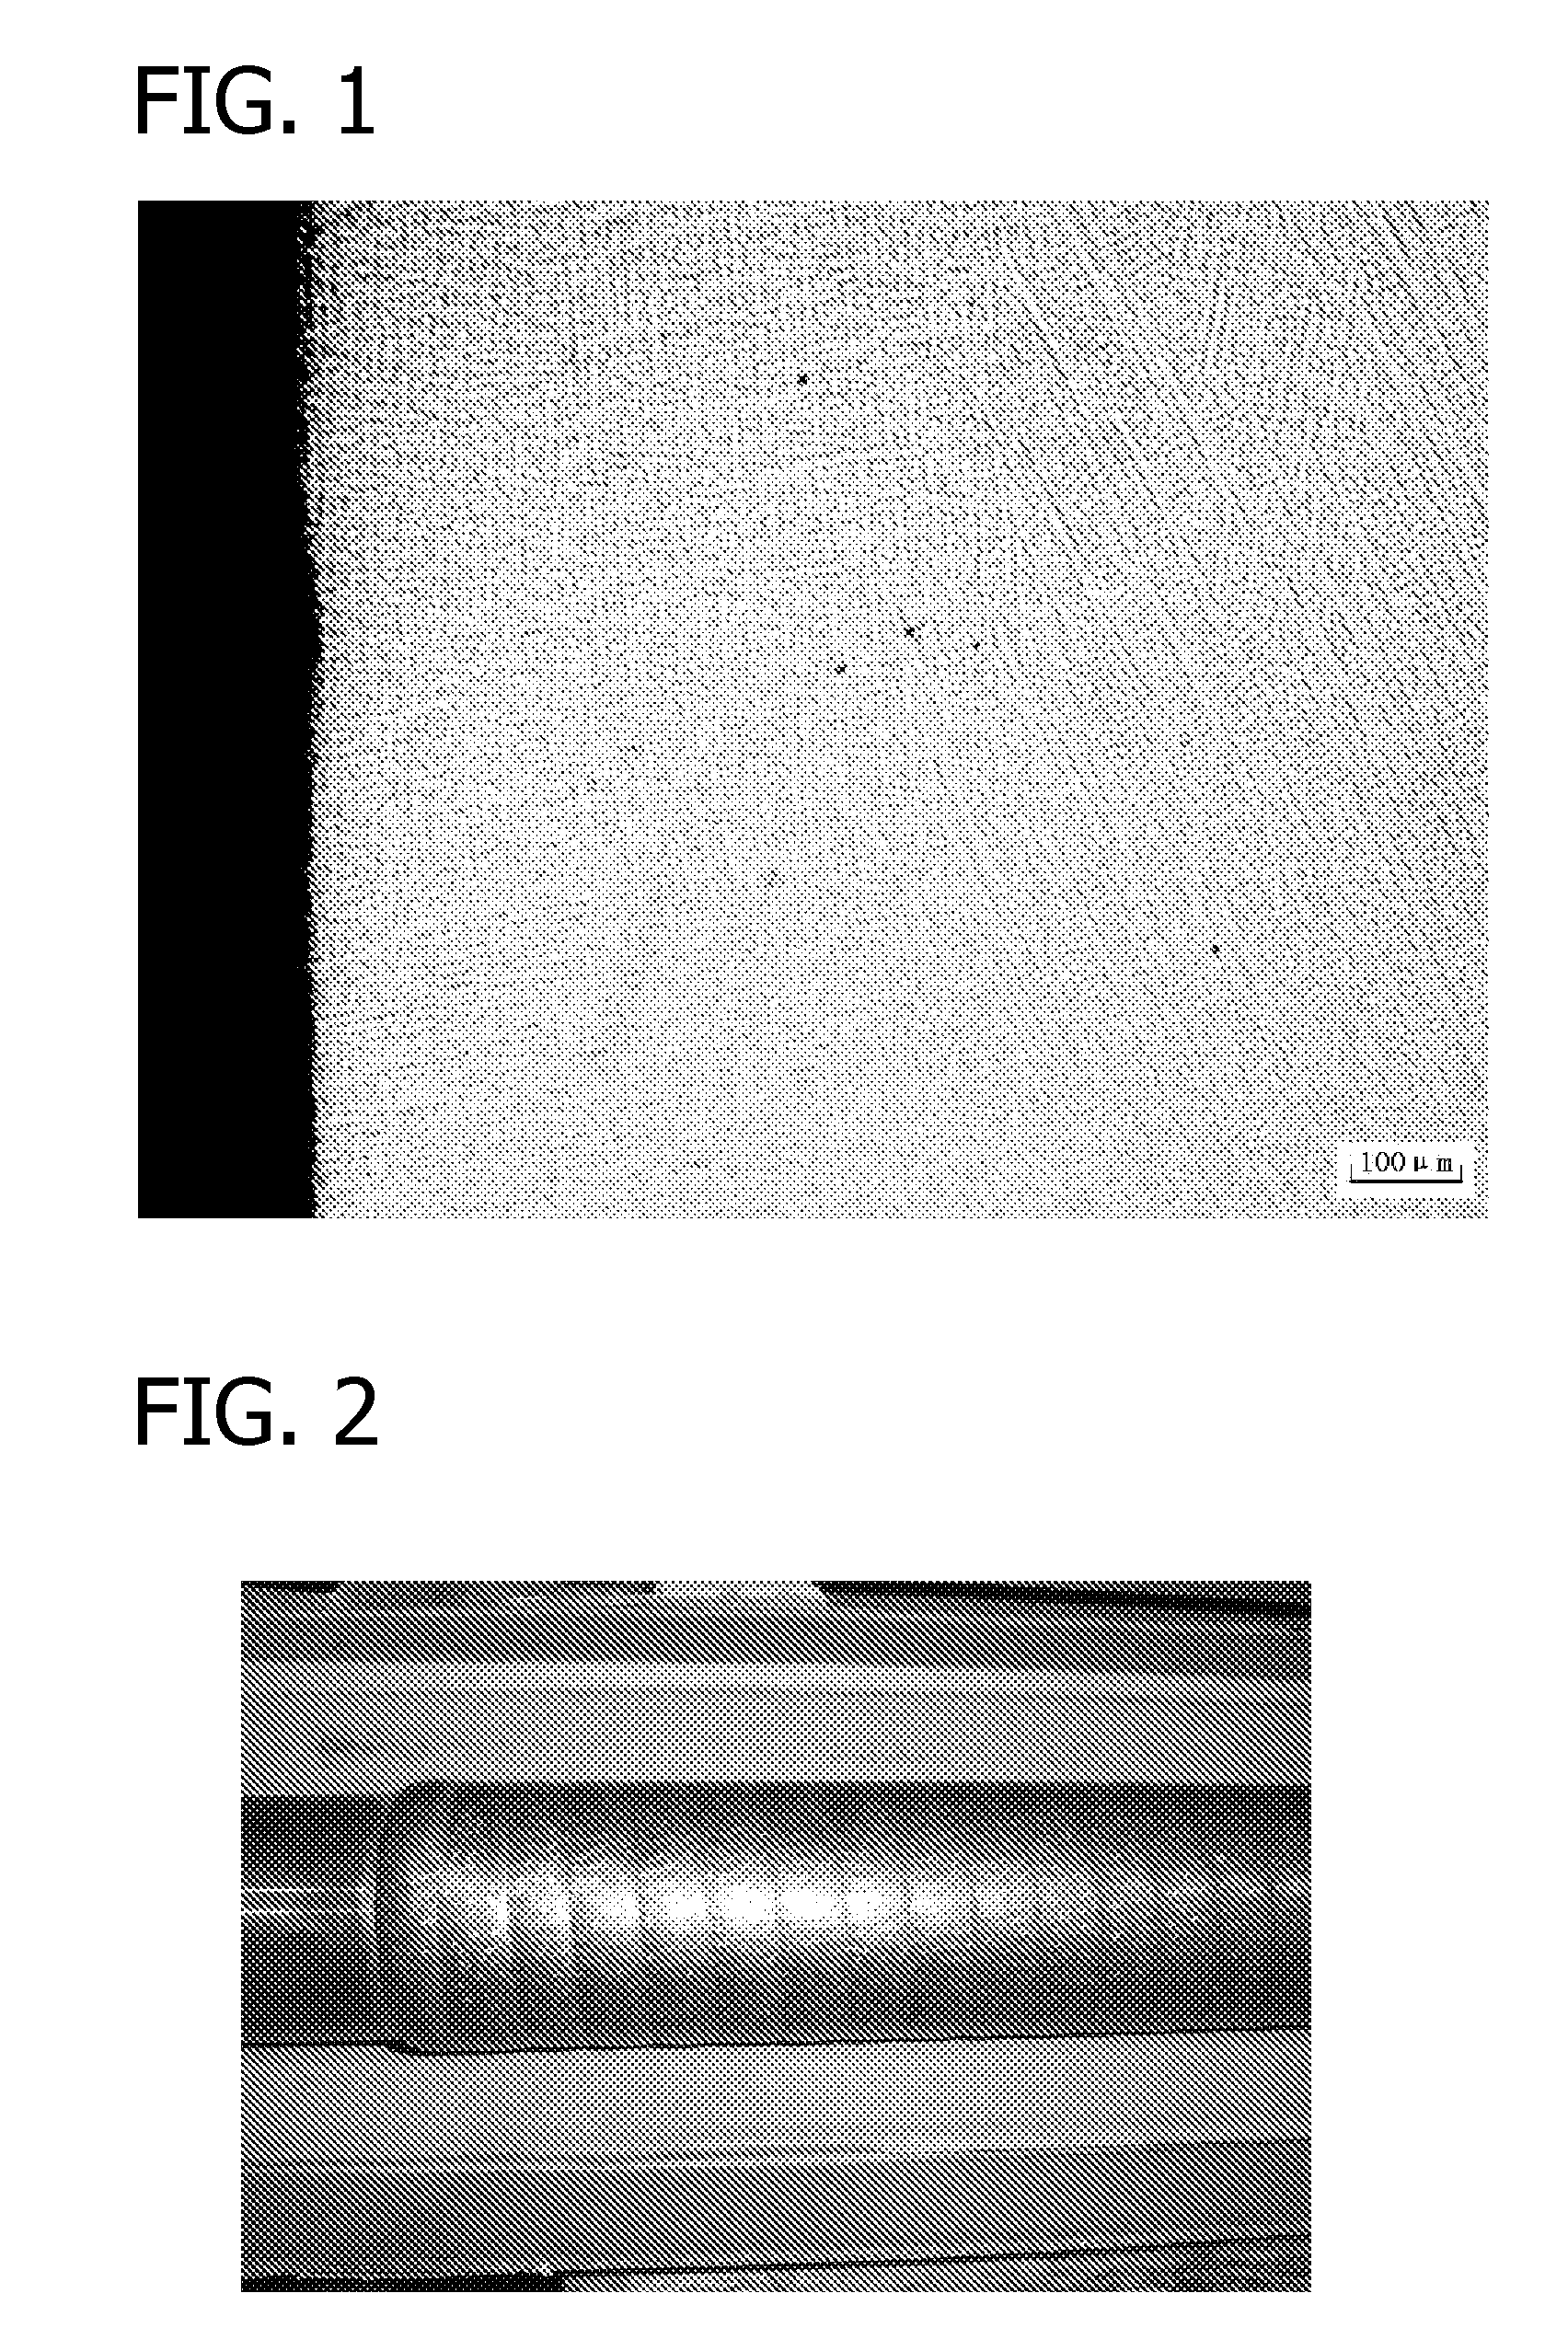 Weldable, crack-resistant co-based alloy and overlay method